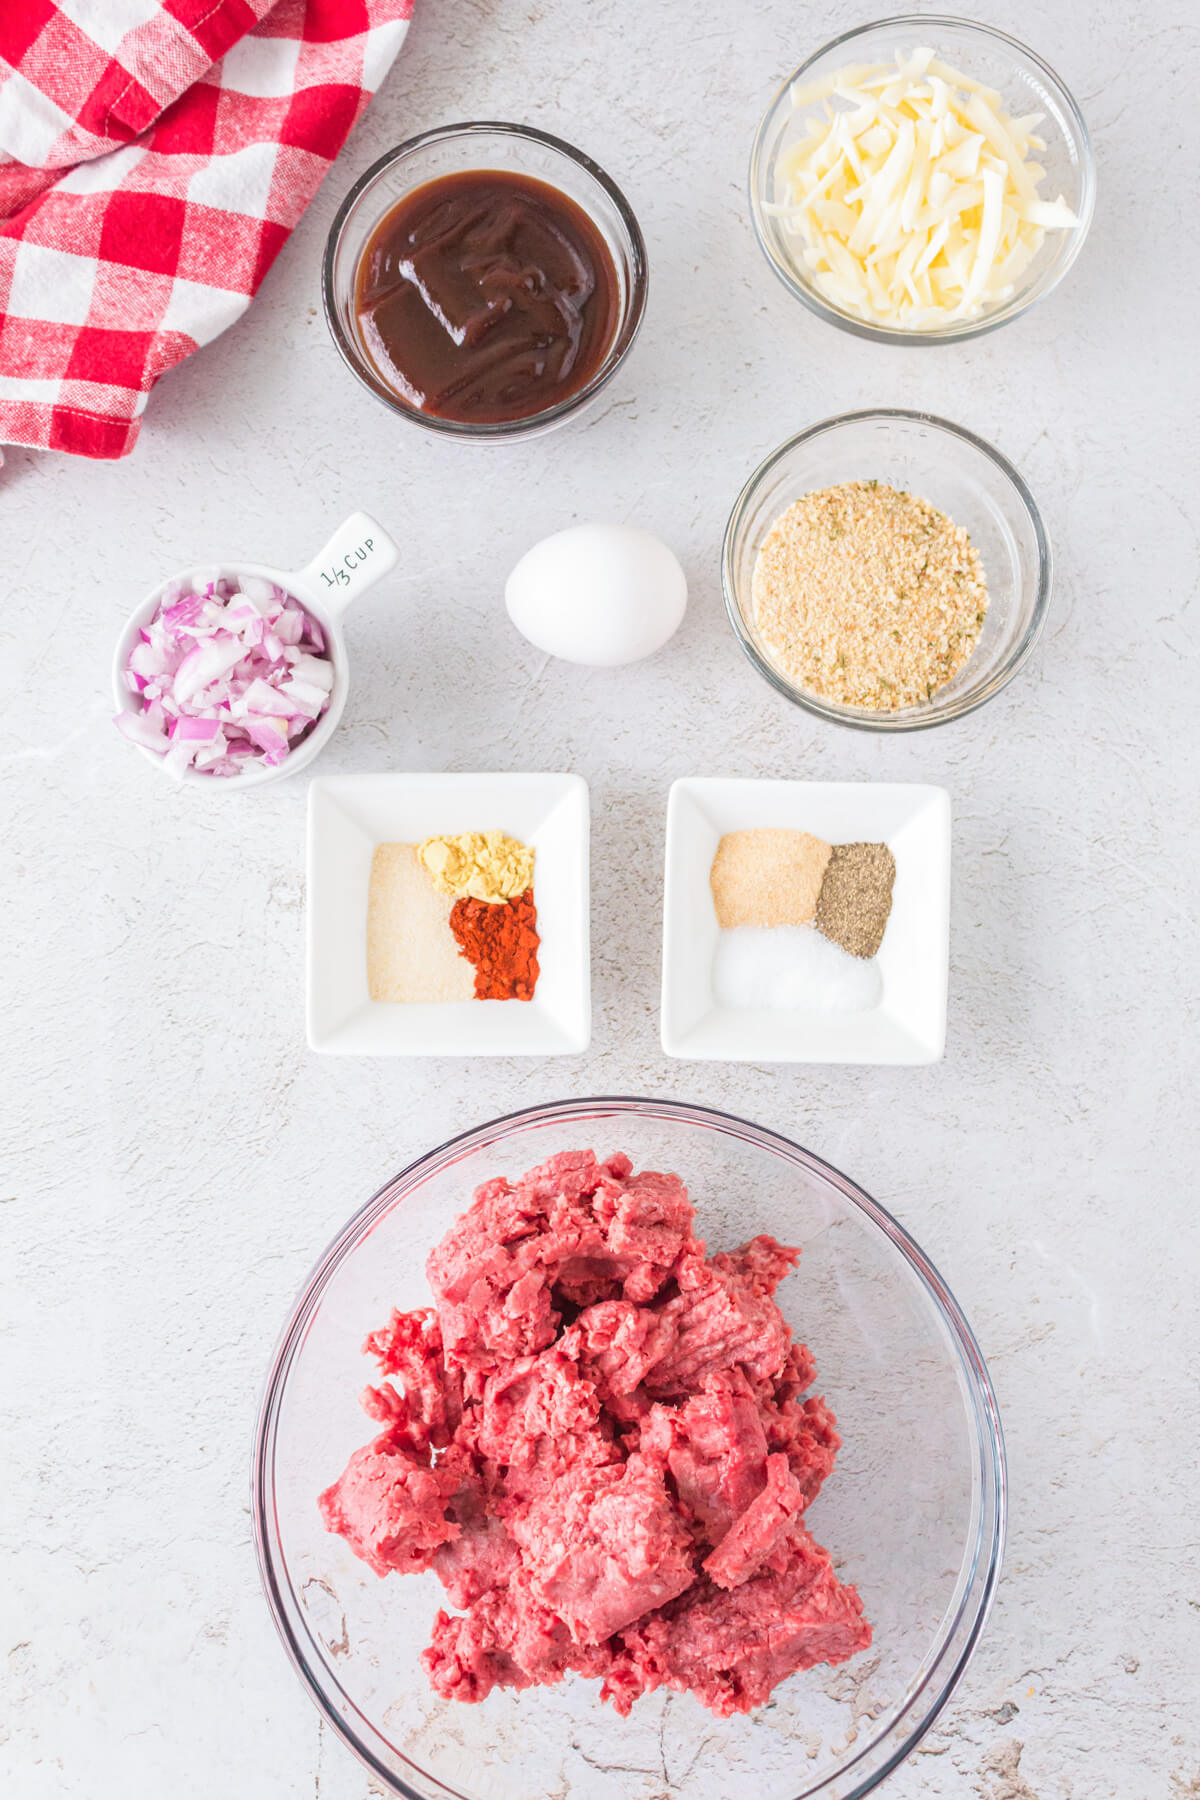 Ingredients required to make smoked meatballs.